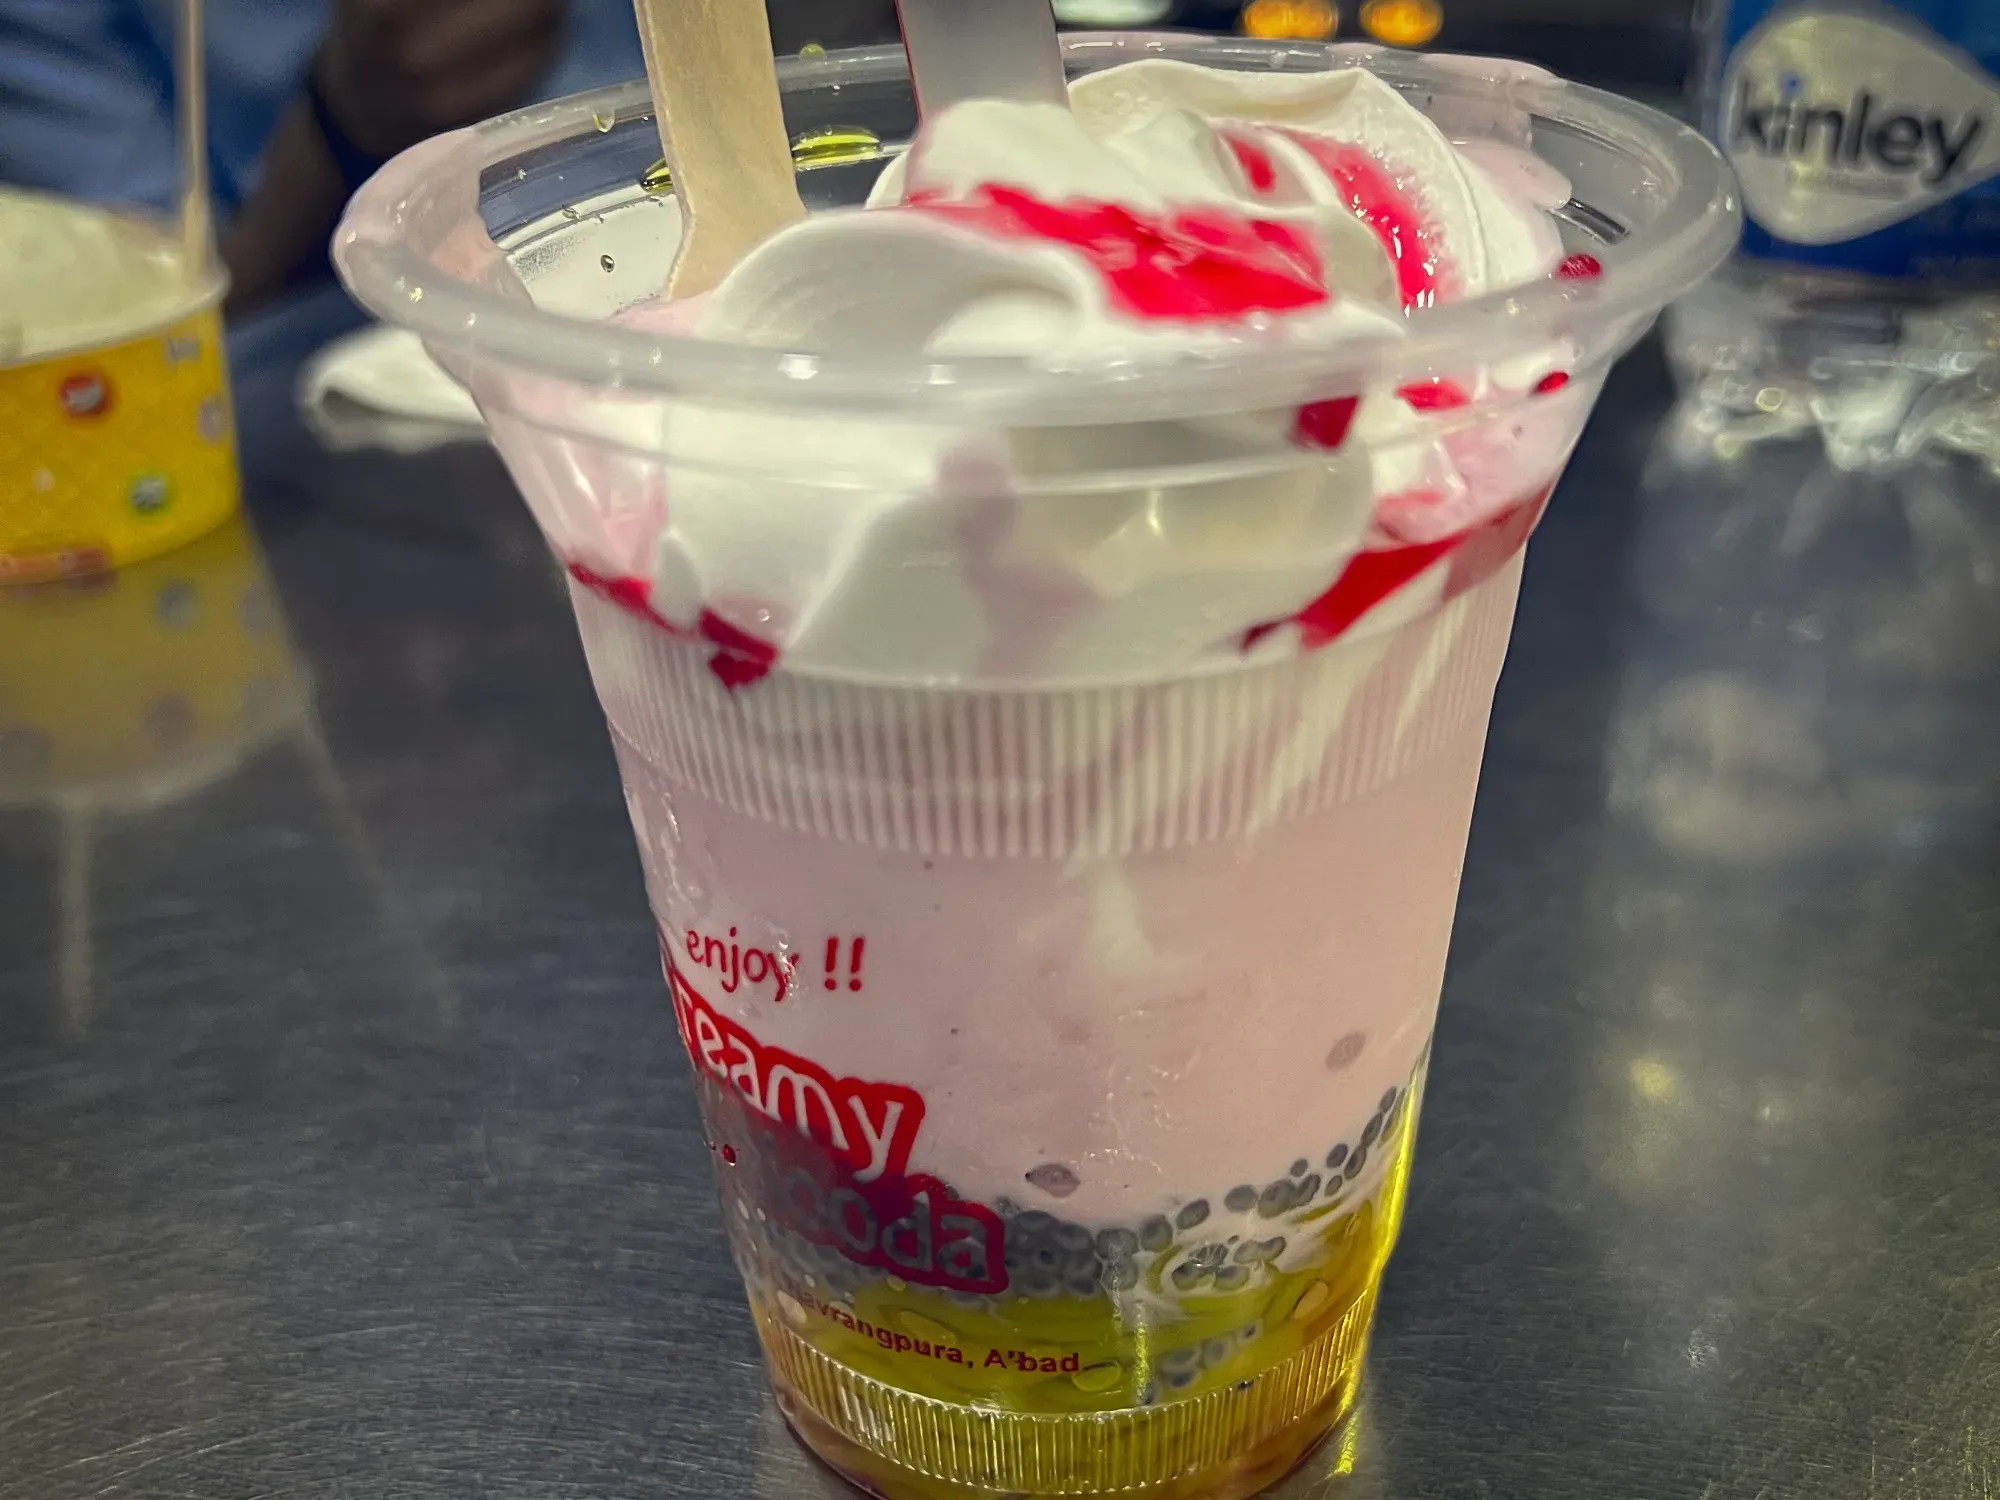 Close up side shot of a cup of Falooda, showing the various layers when served.